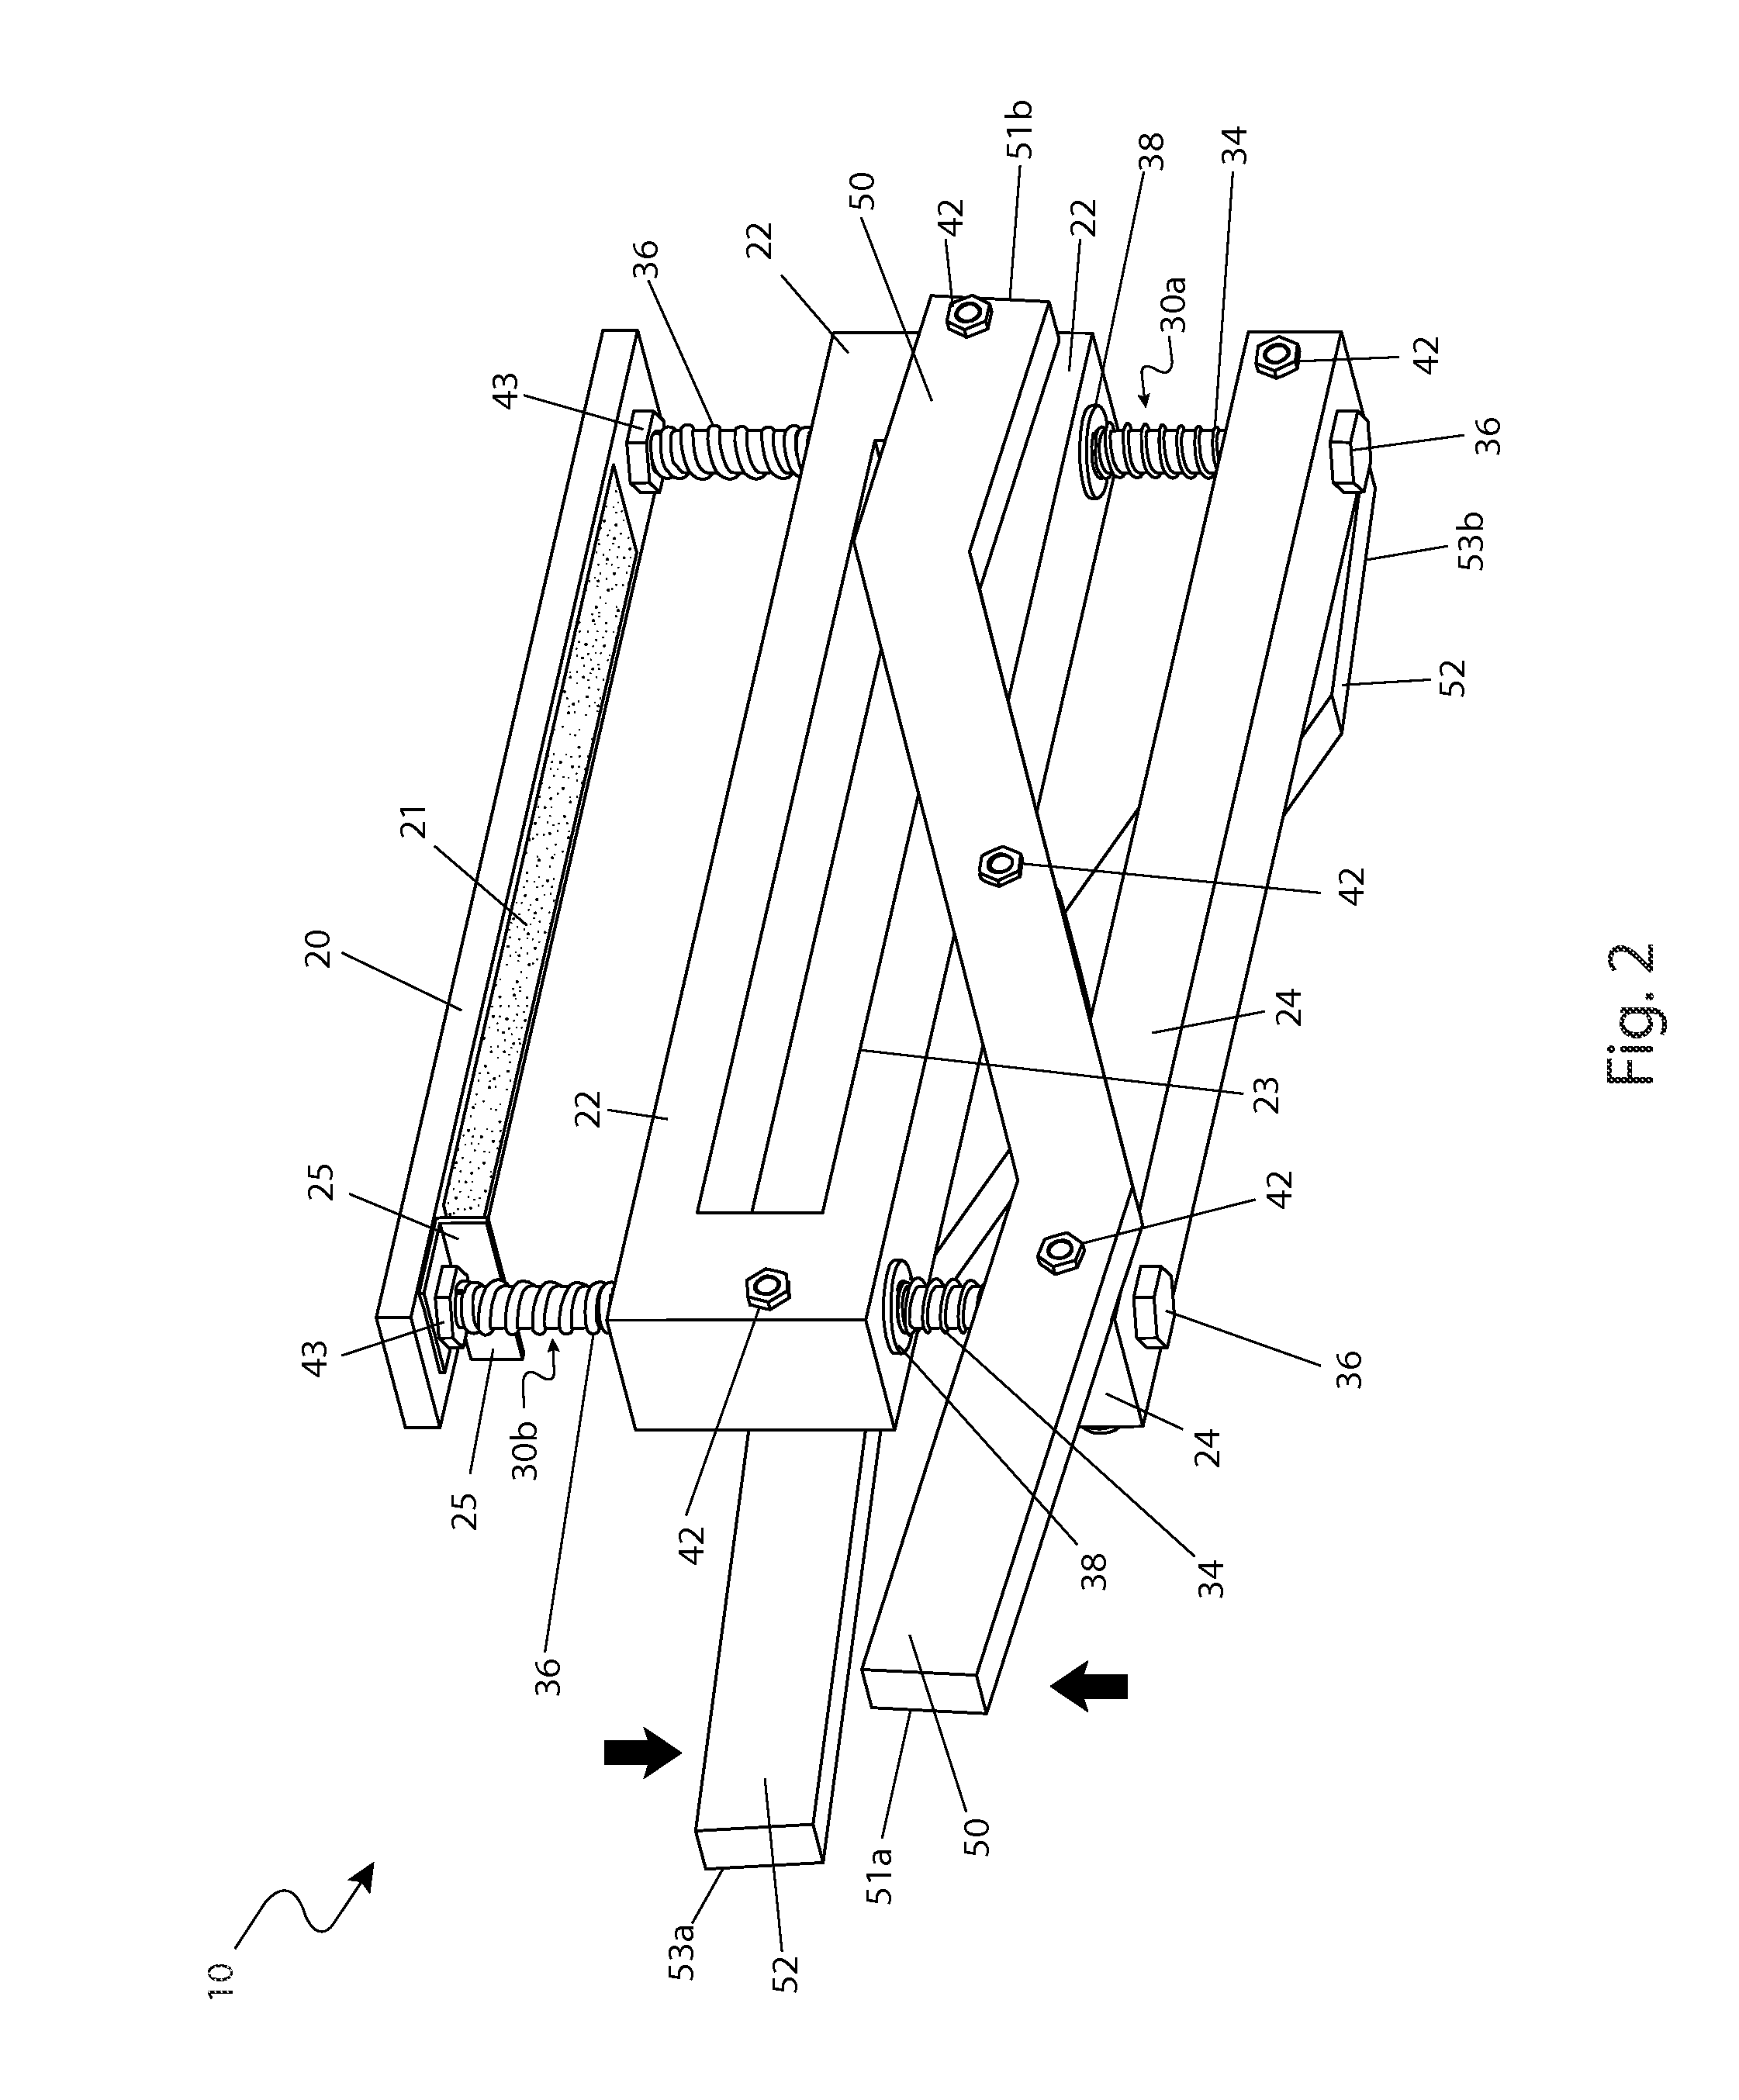 Adjustable cutting guide